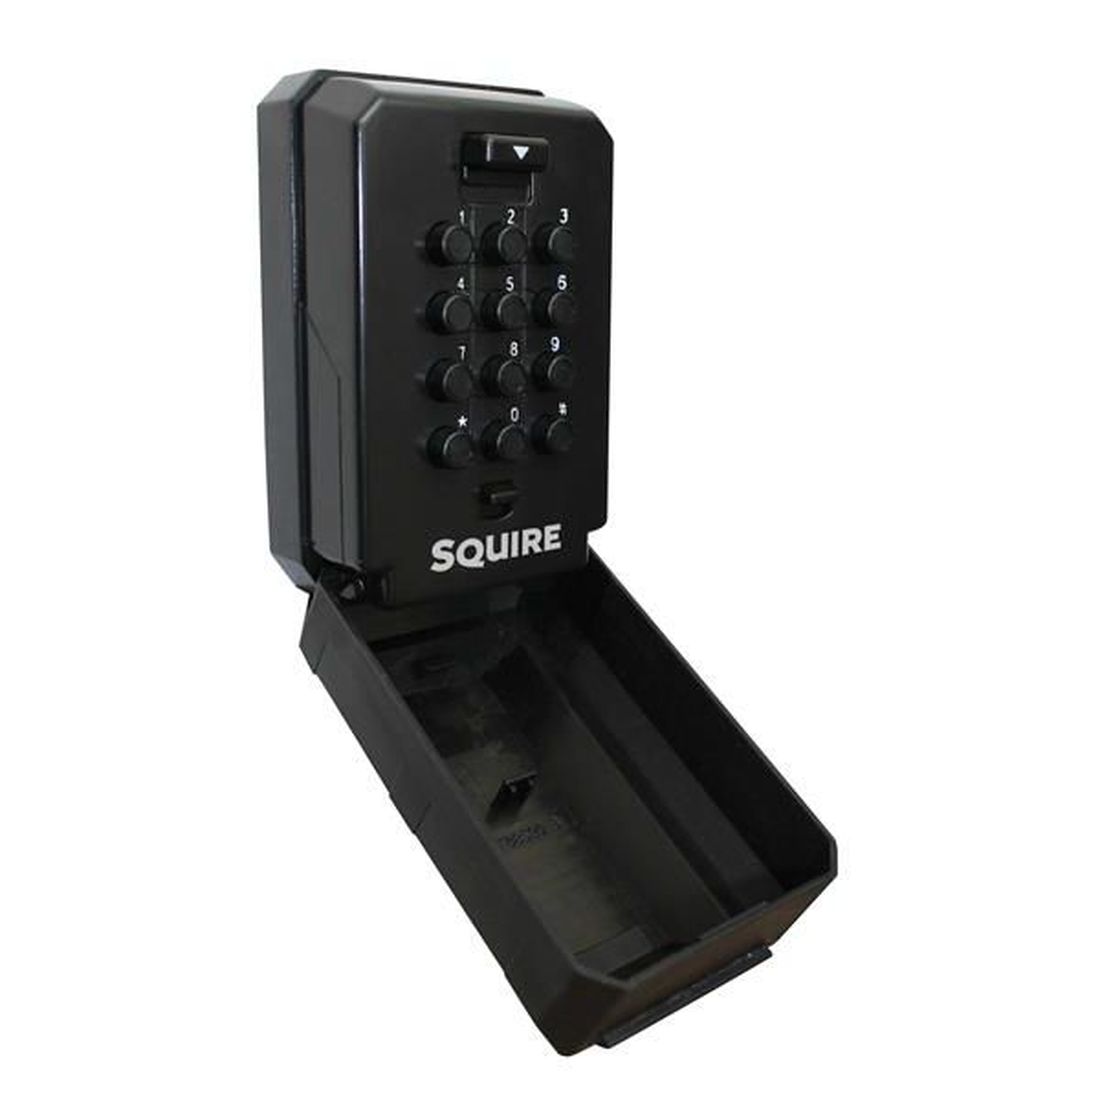 Squire Push Button Key Safe              